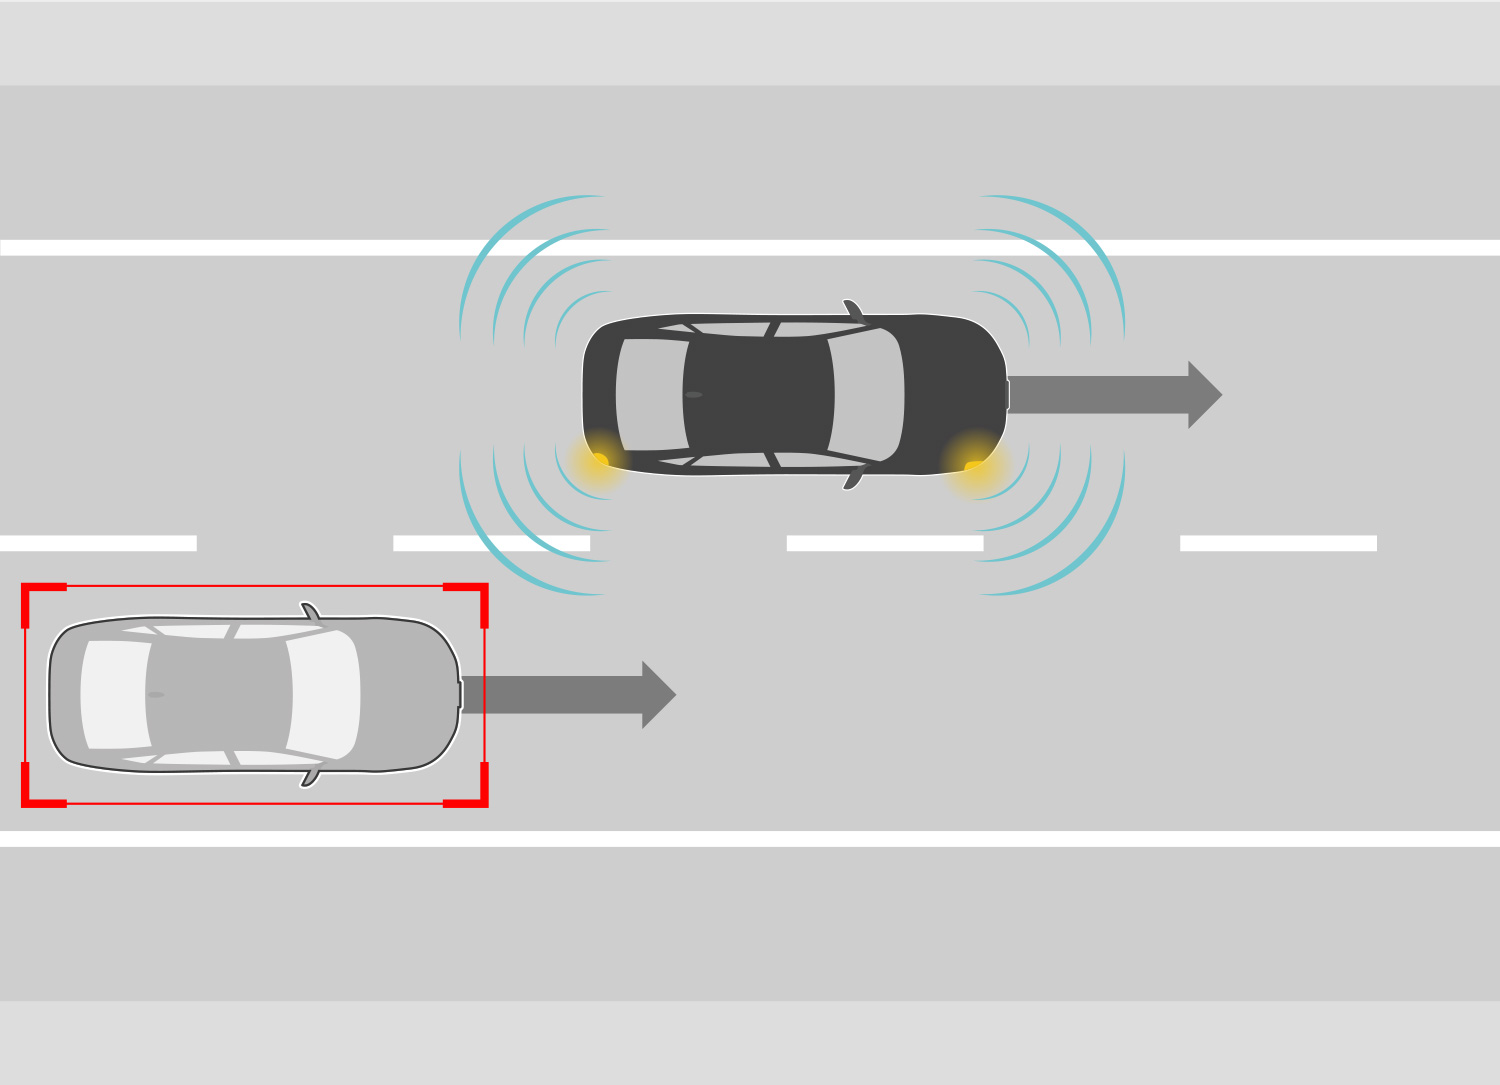 When the driver starts making a lane change, the system detects the risk of a collision with vehicles approaching from behind.